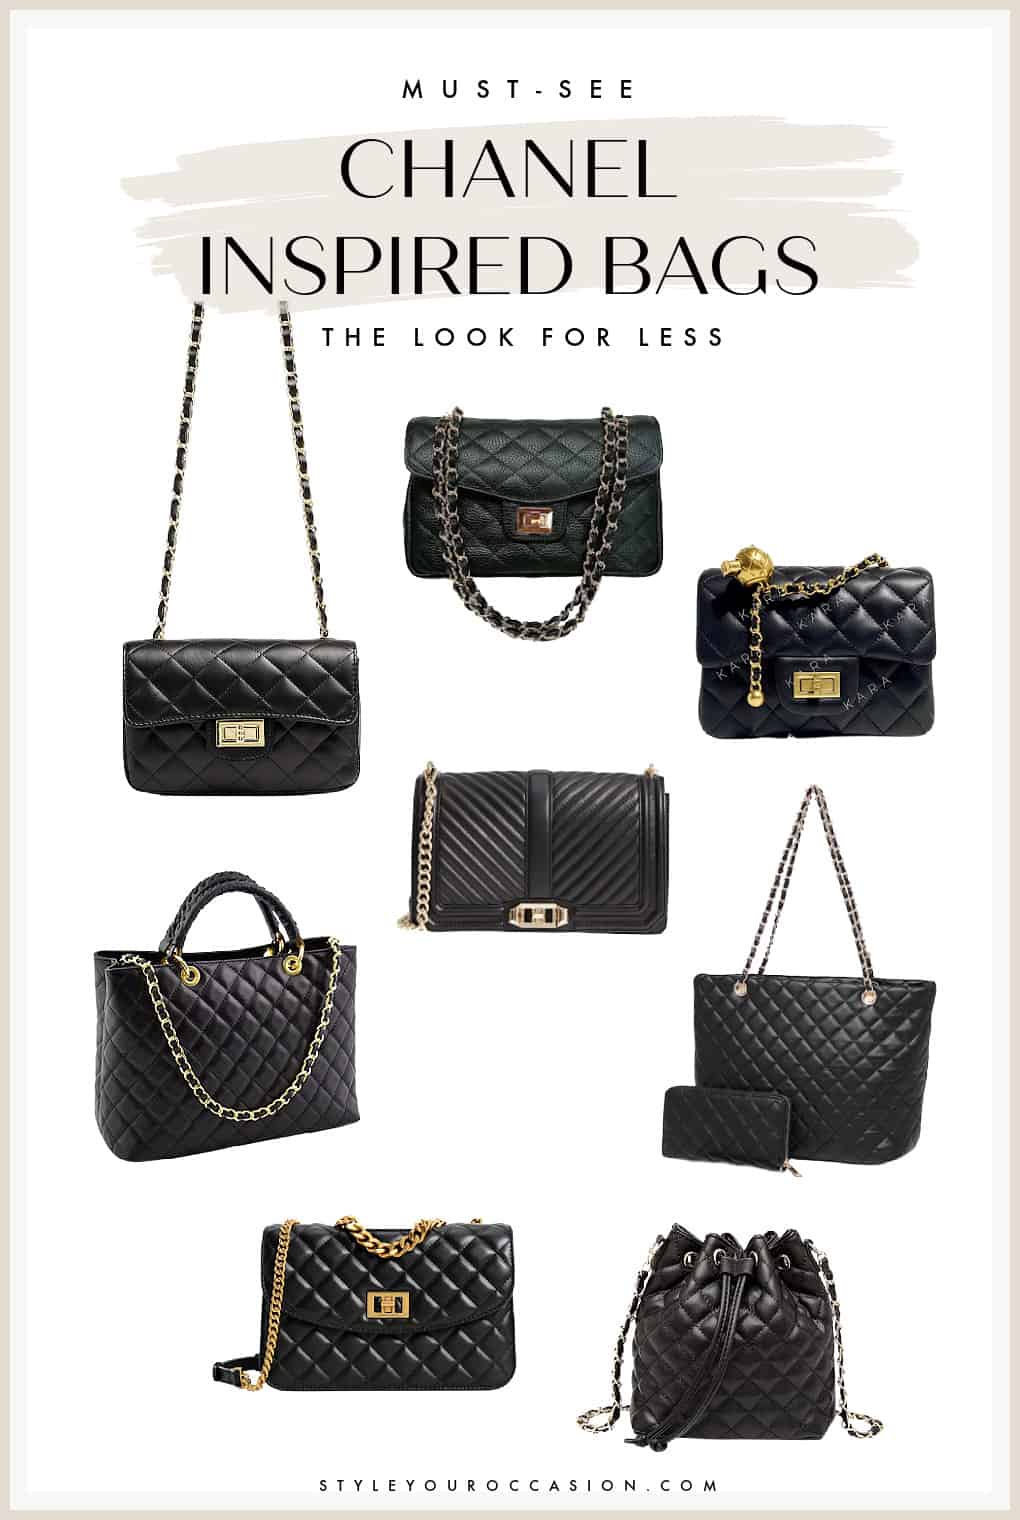 An image board of Chanel bag dupes and look-alikes